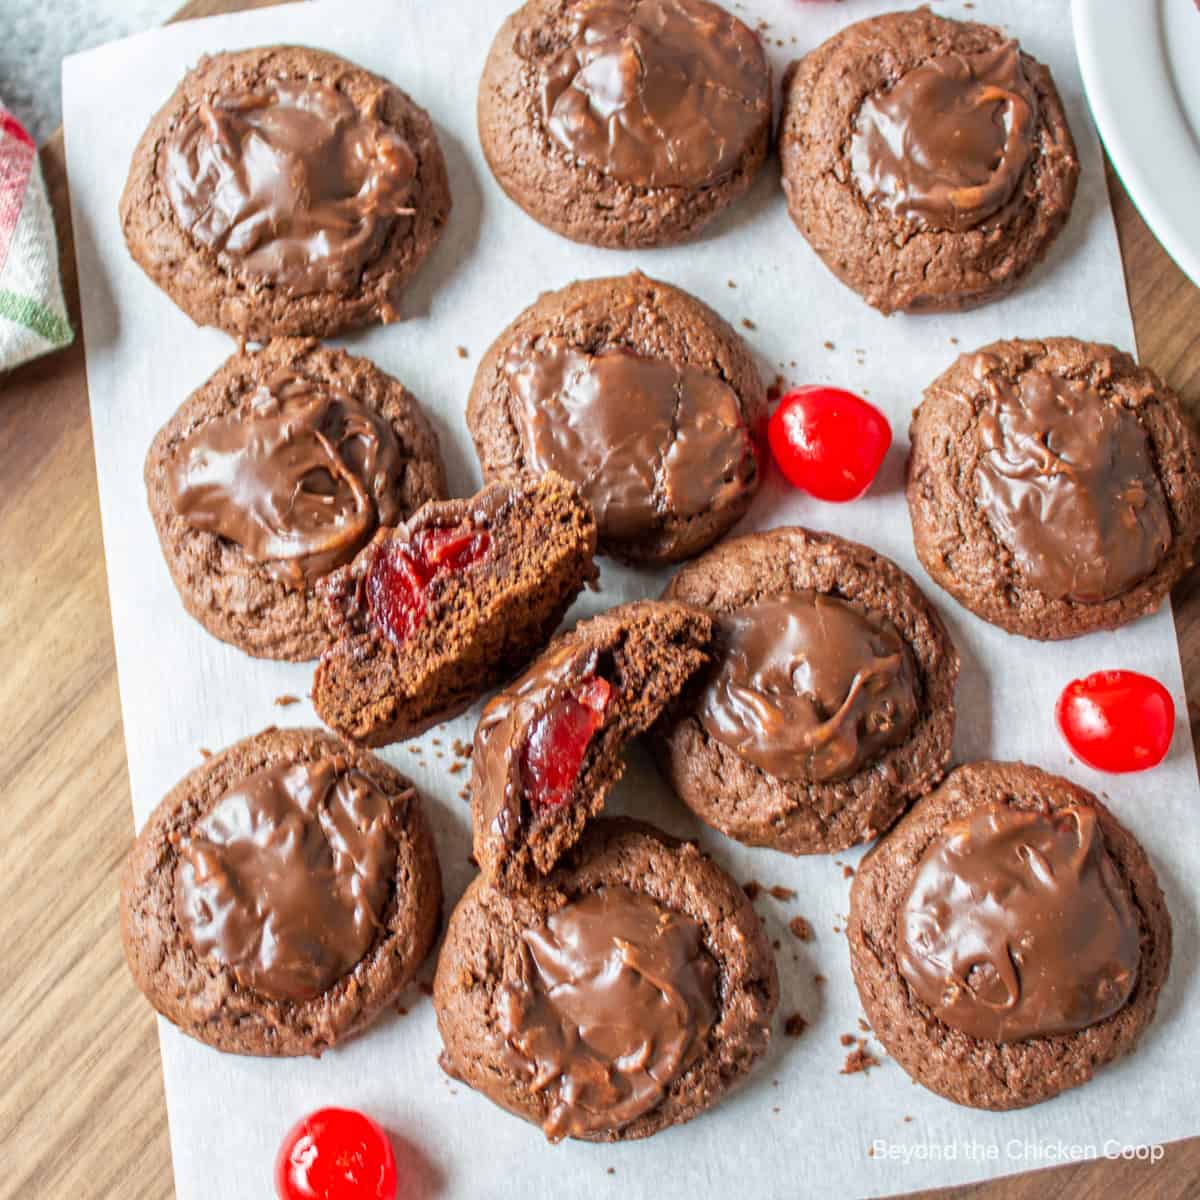 Chocolate cookies with a cherry in the center.